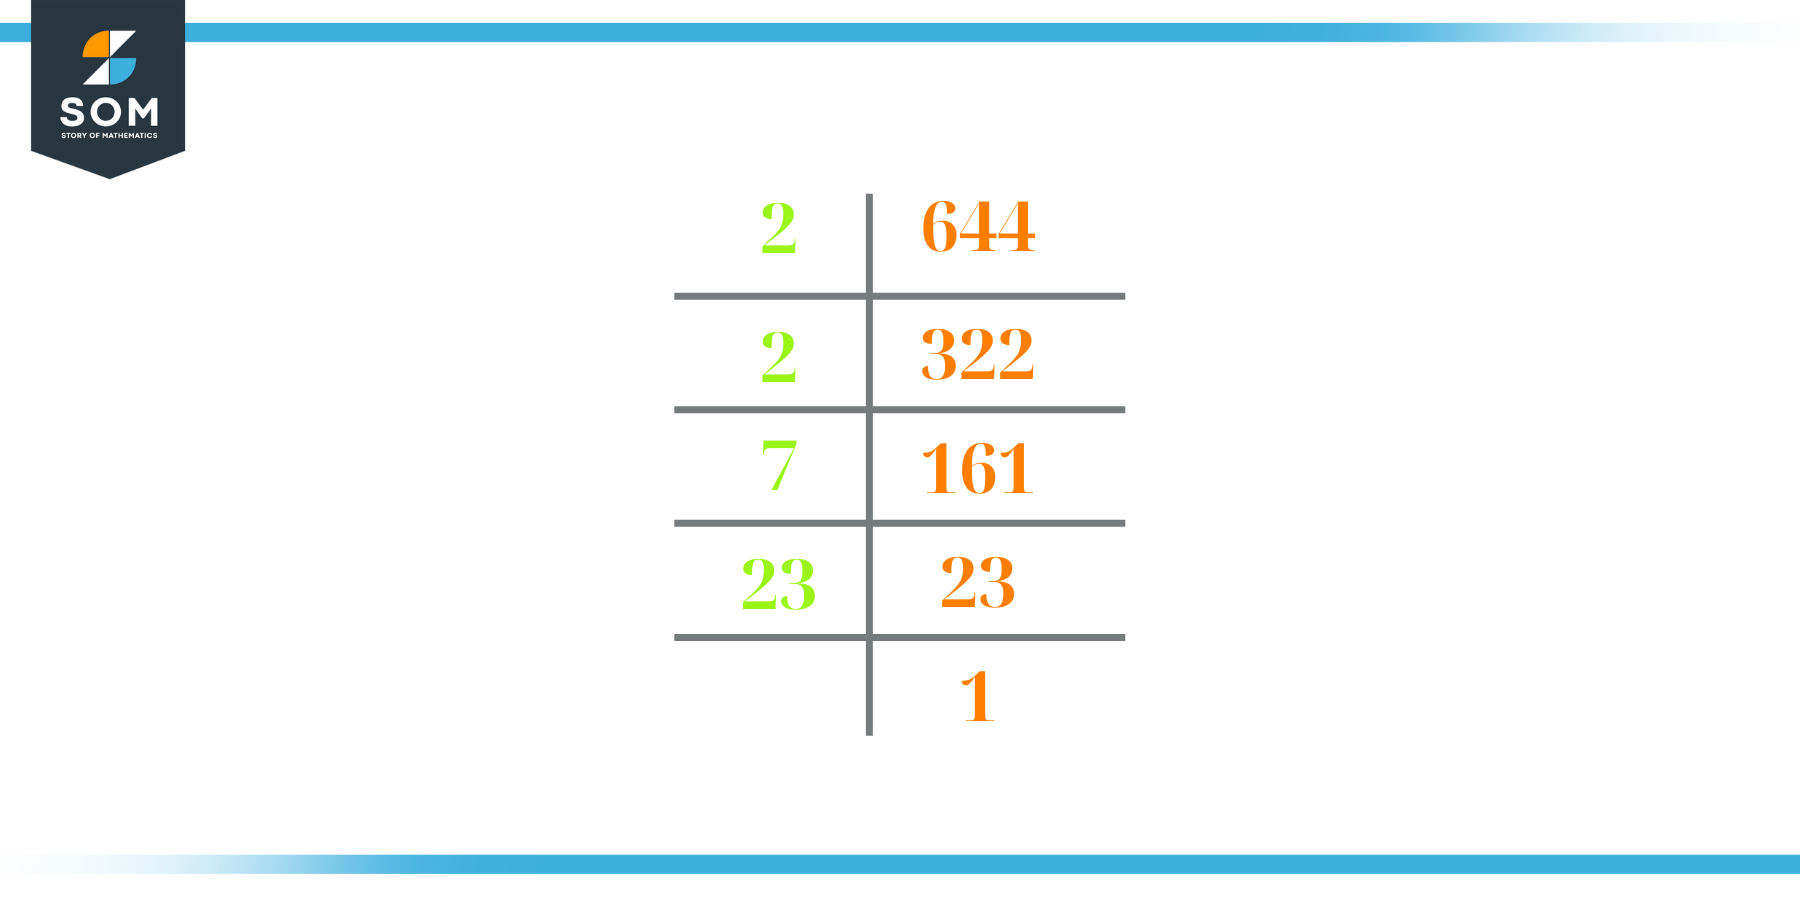 Factors of 644: Prime Factorization, Methods, and Example